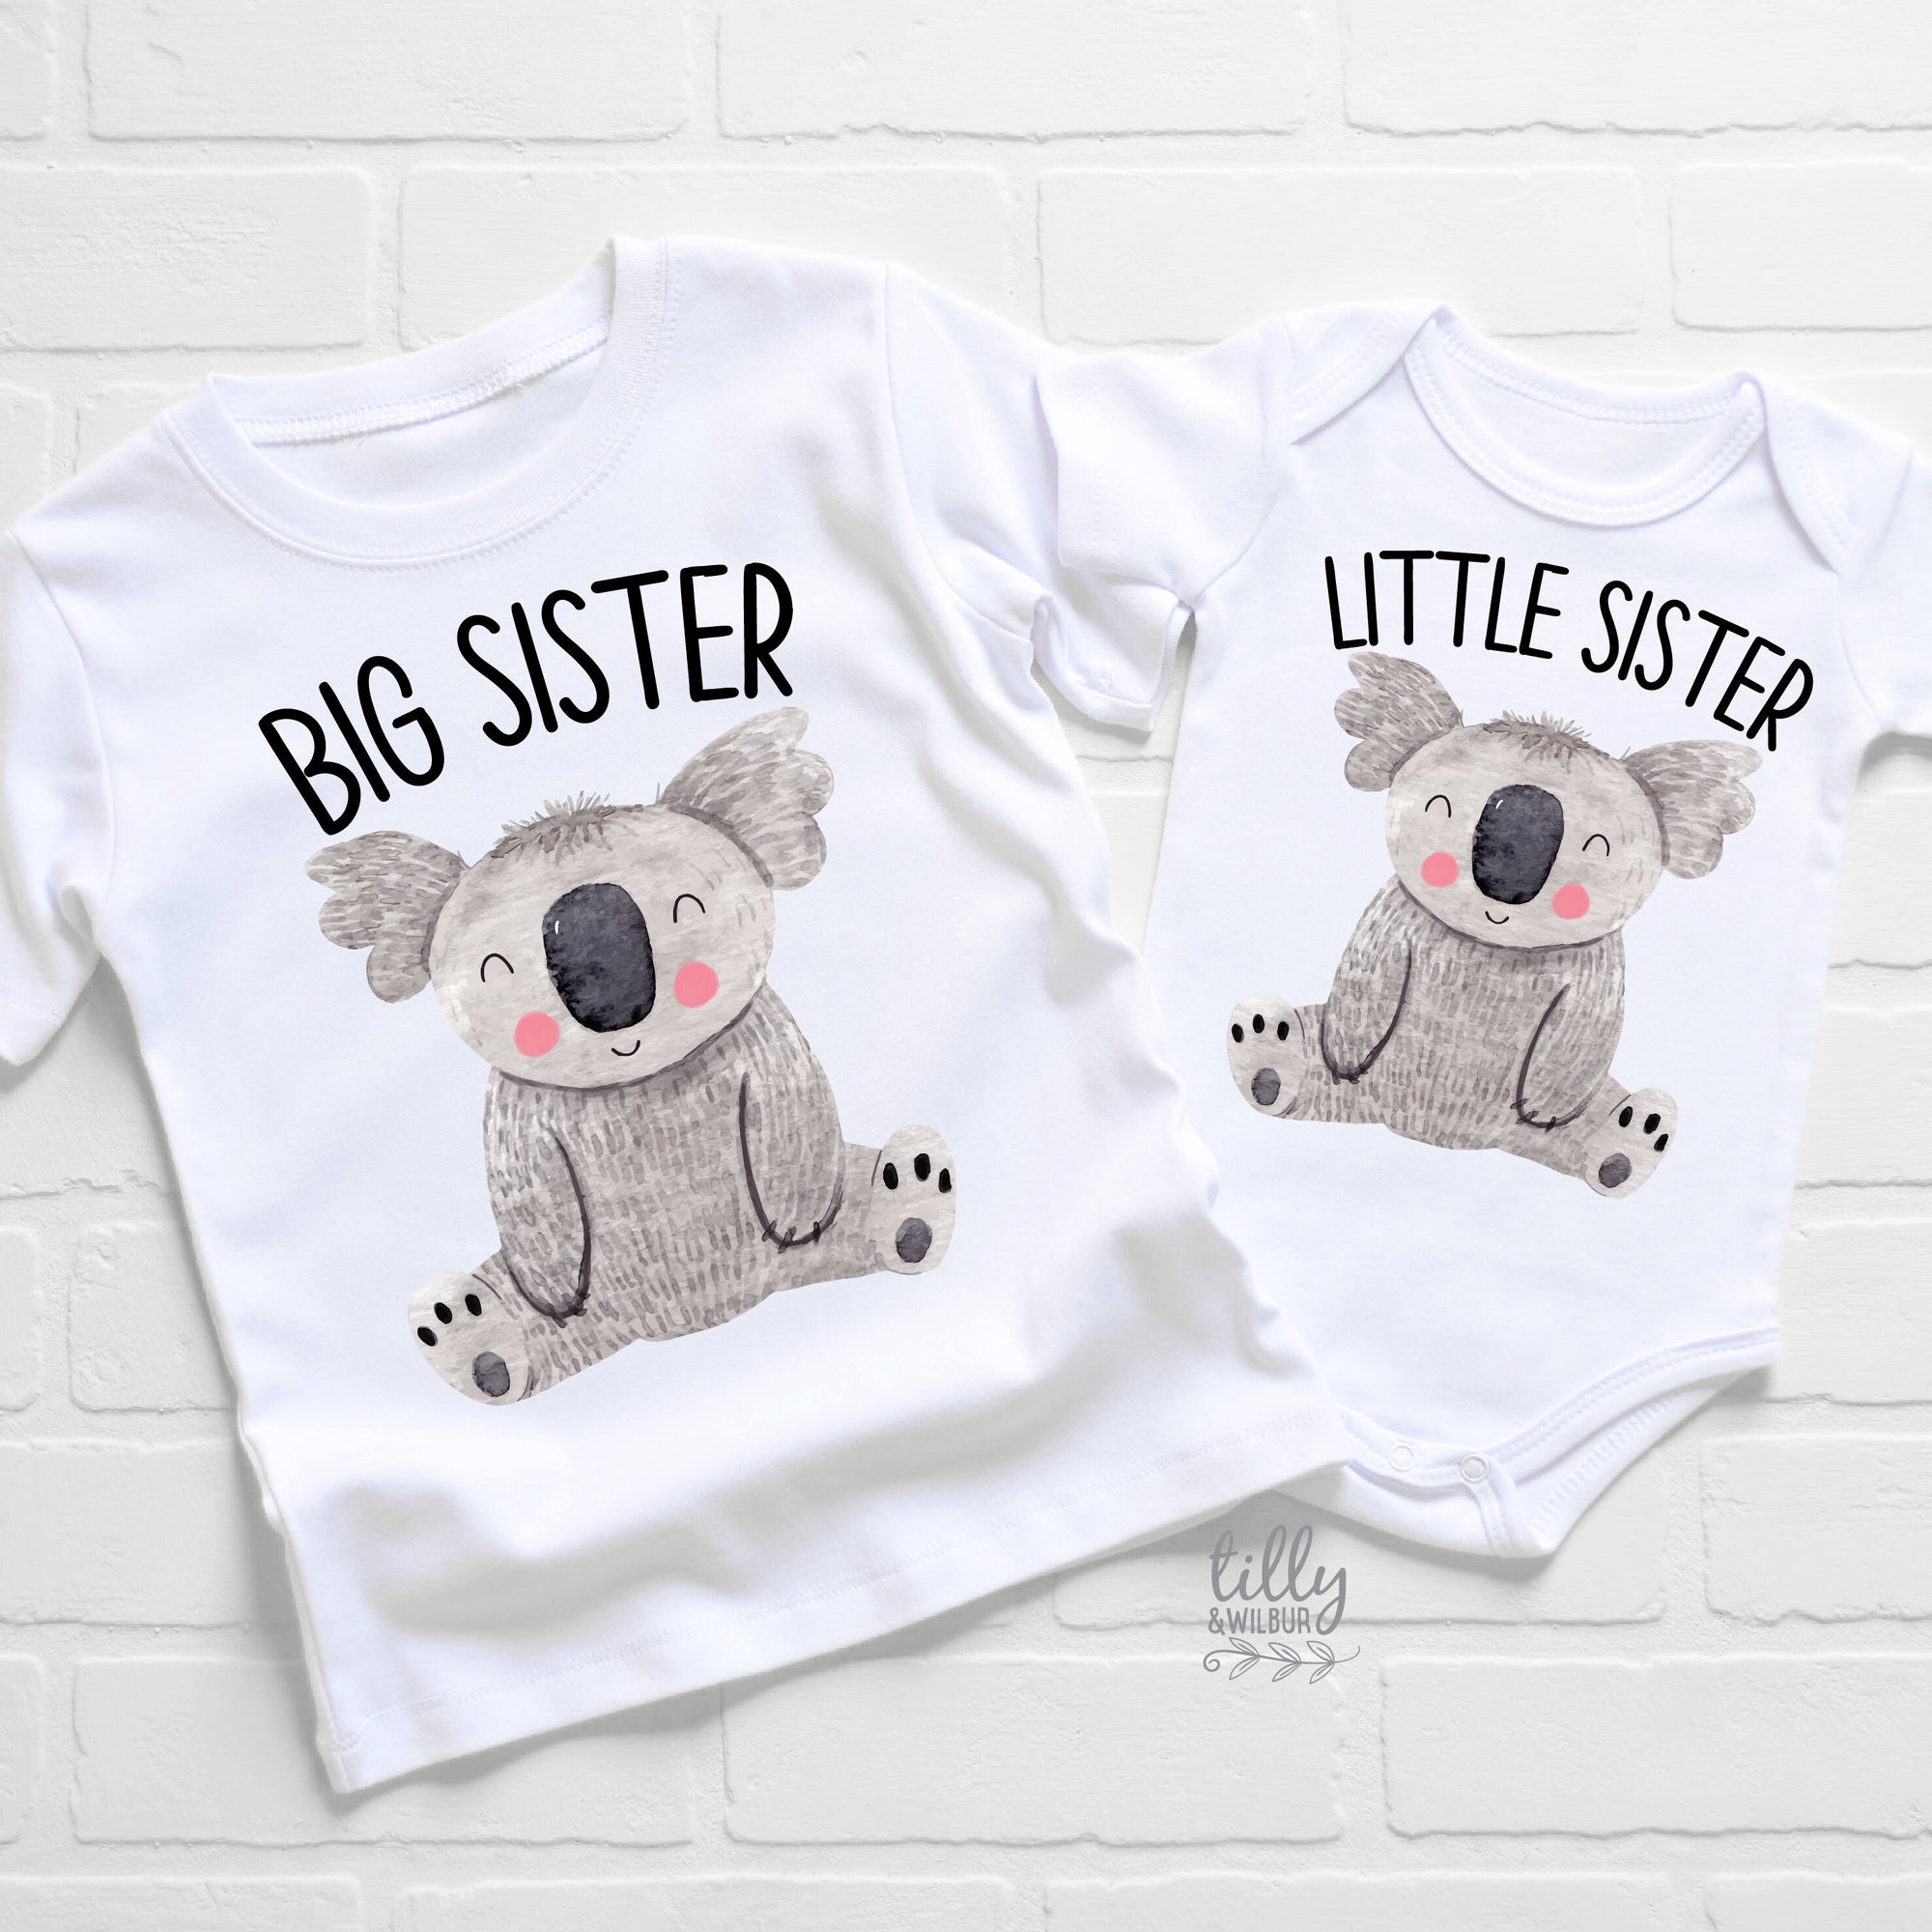 Big Sister Little Sister Set, Matching Brother Outfits, Matchy Matchy Sibling T-Shirts, Big Sister T-Shirt, Little Sister Bodysuit, Koala